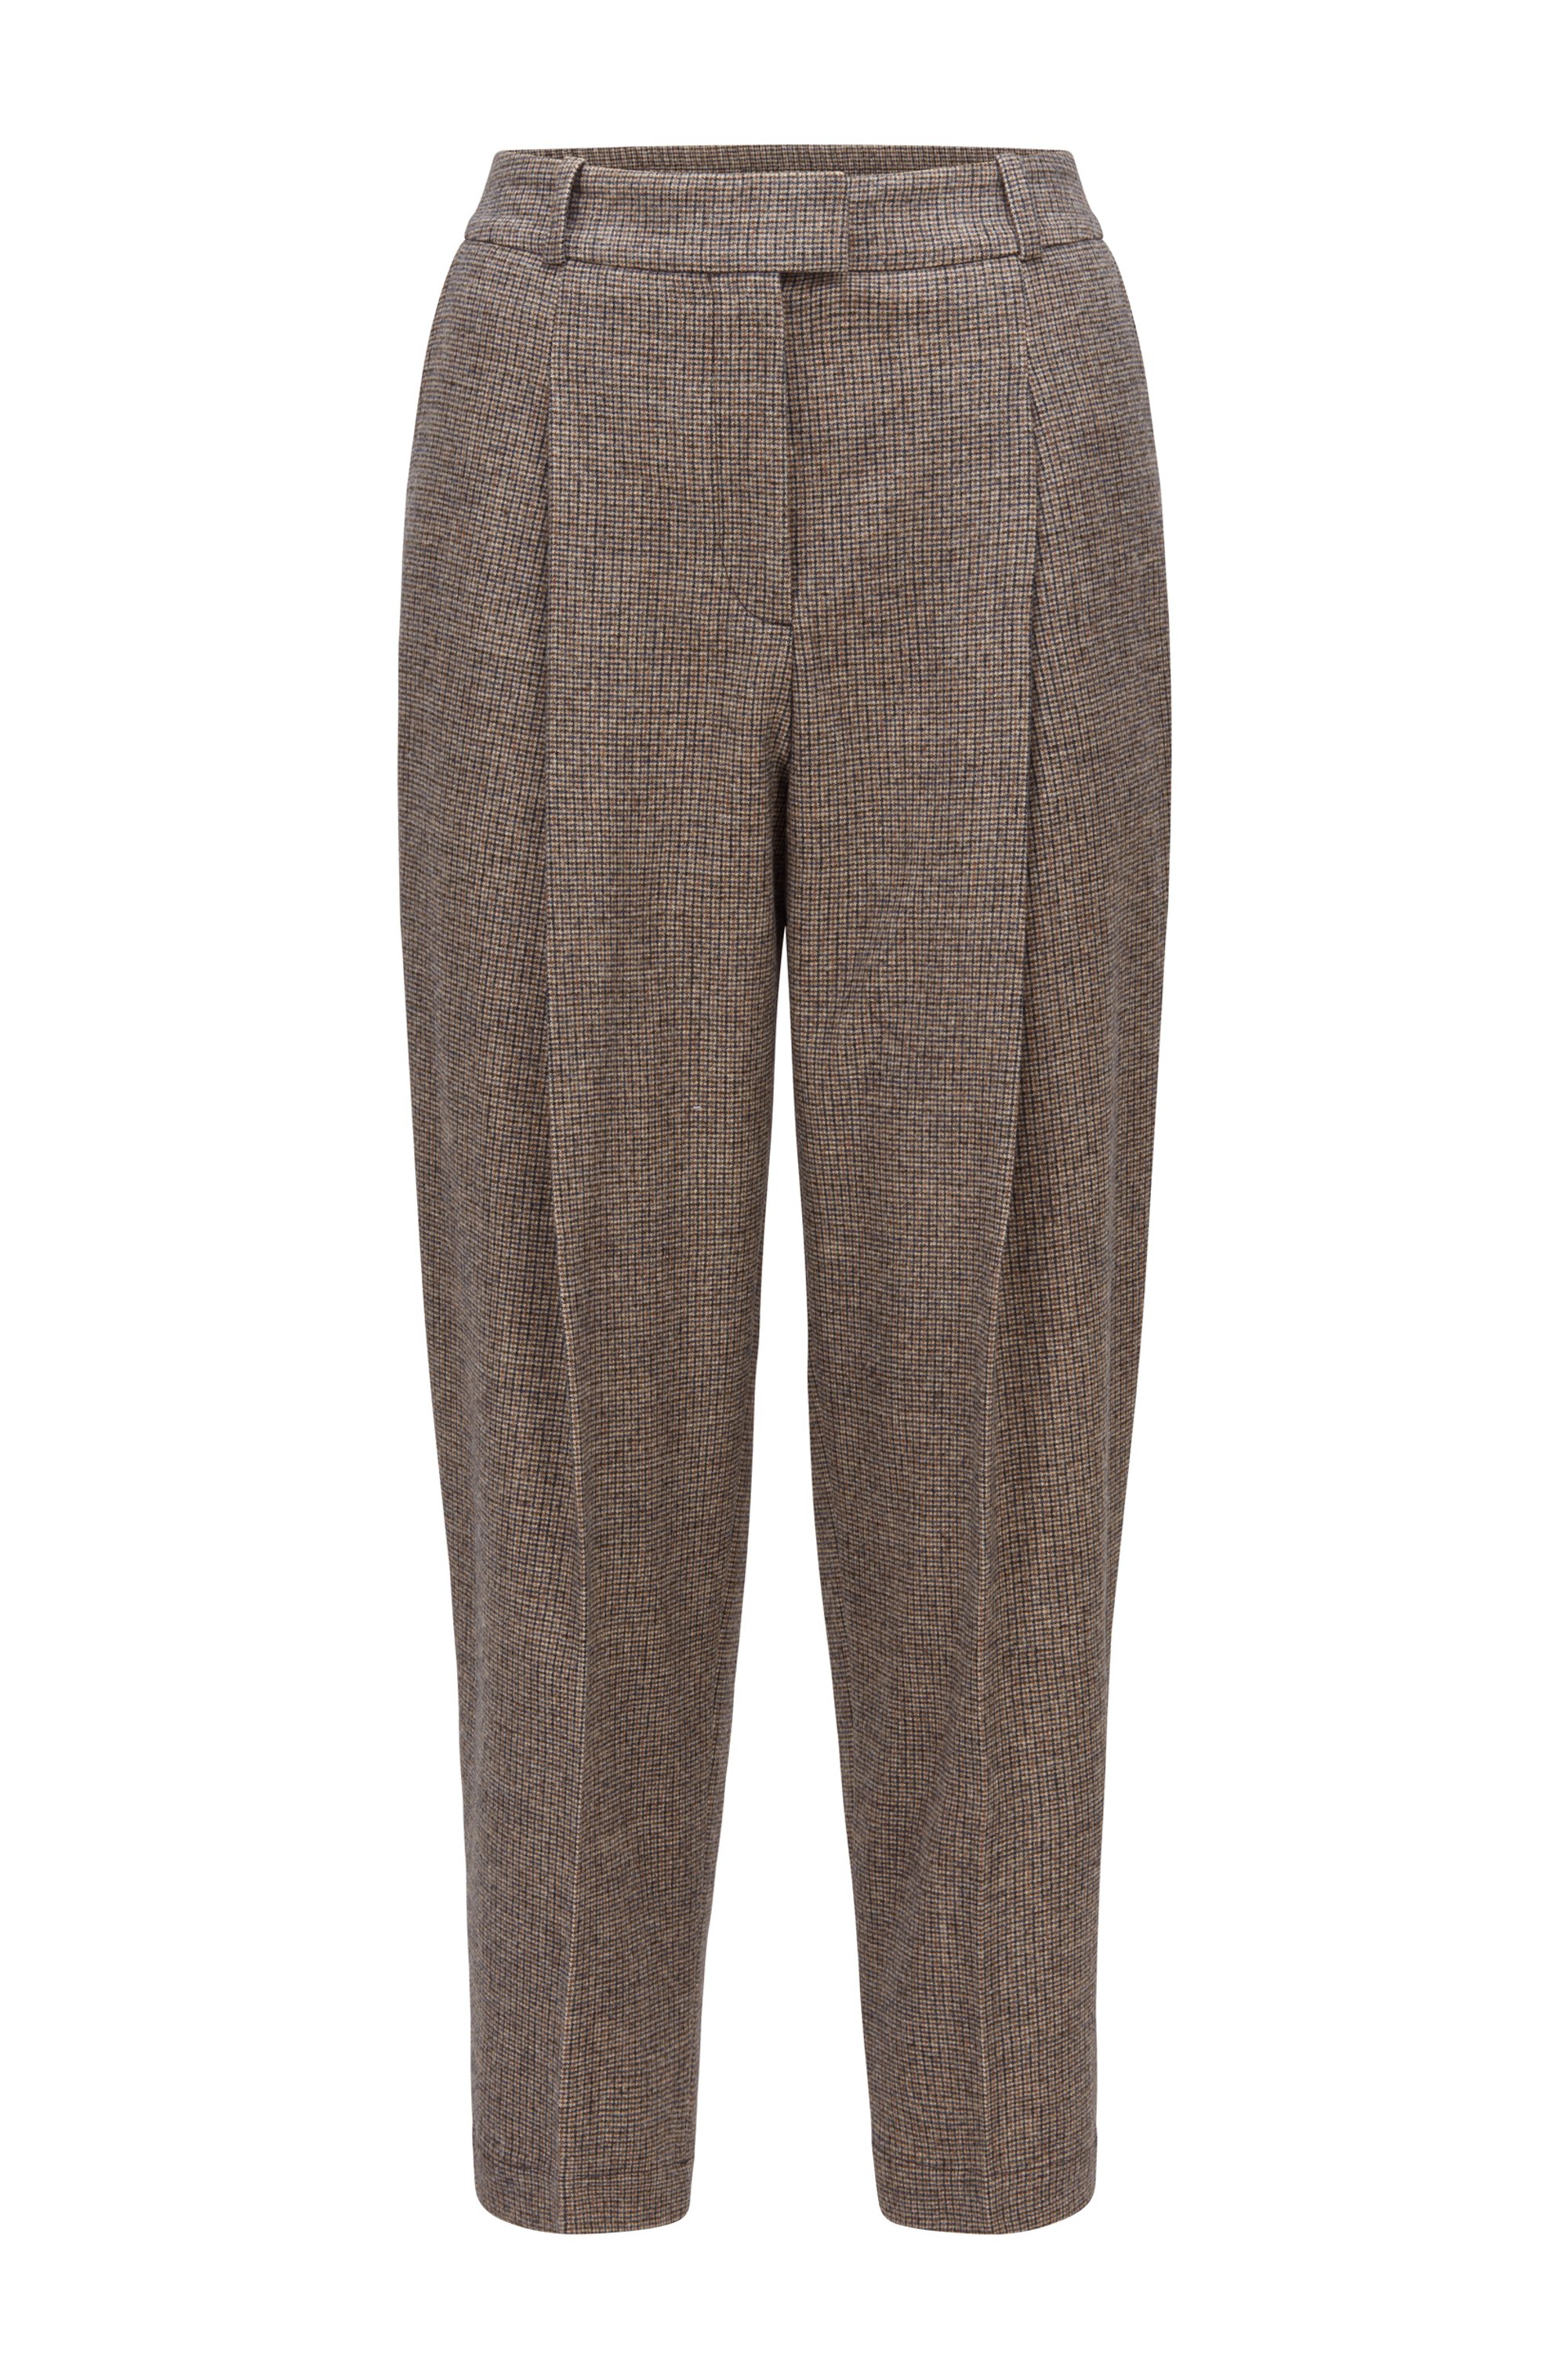 Relaxed-fit trousers in houndstooth cloth with cropped length, Patterned